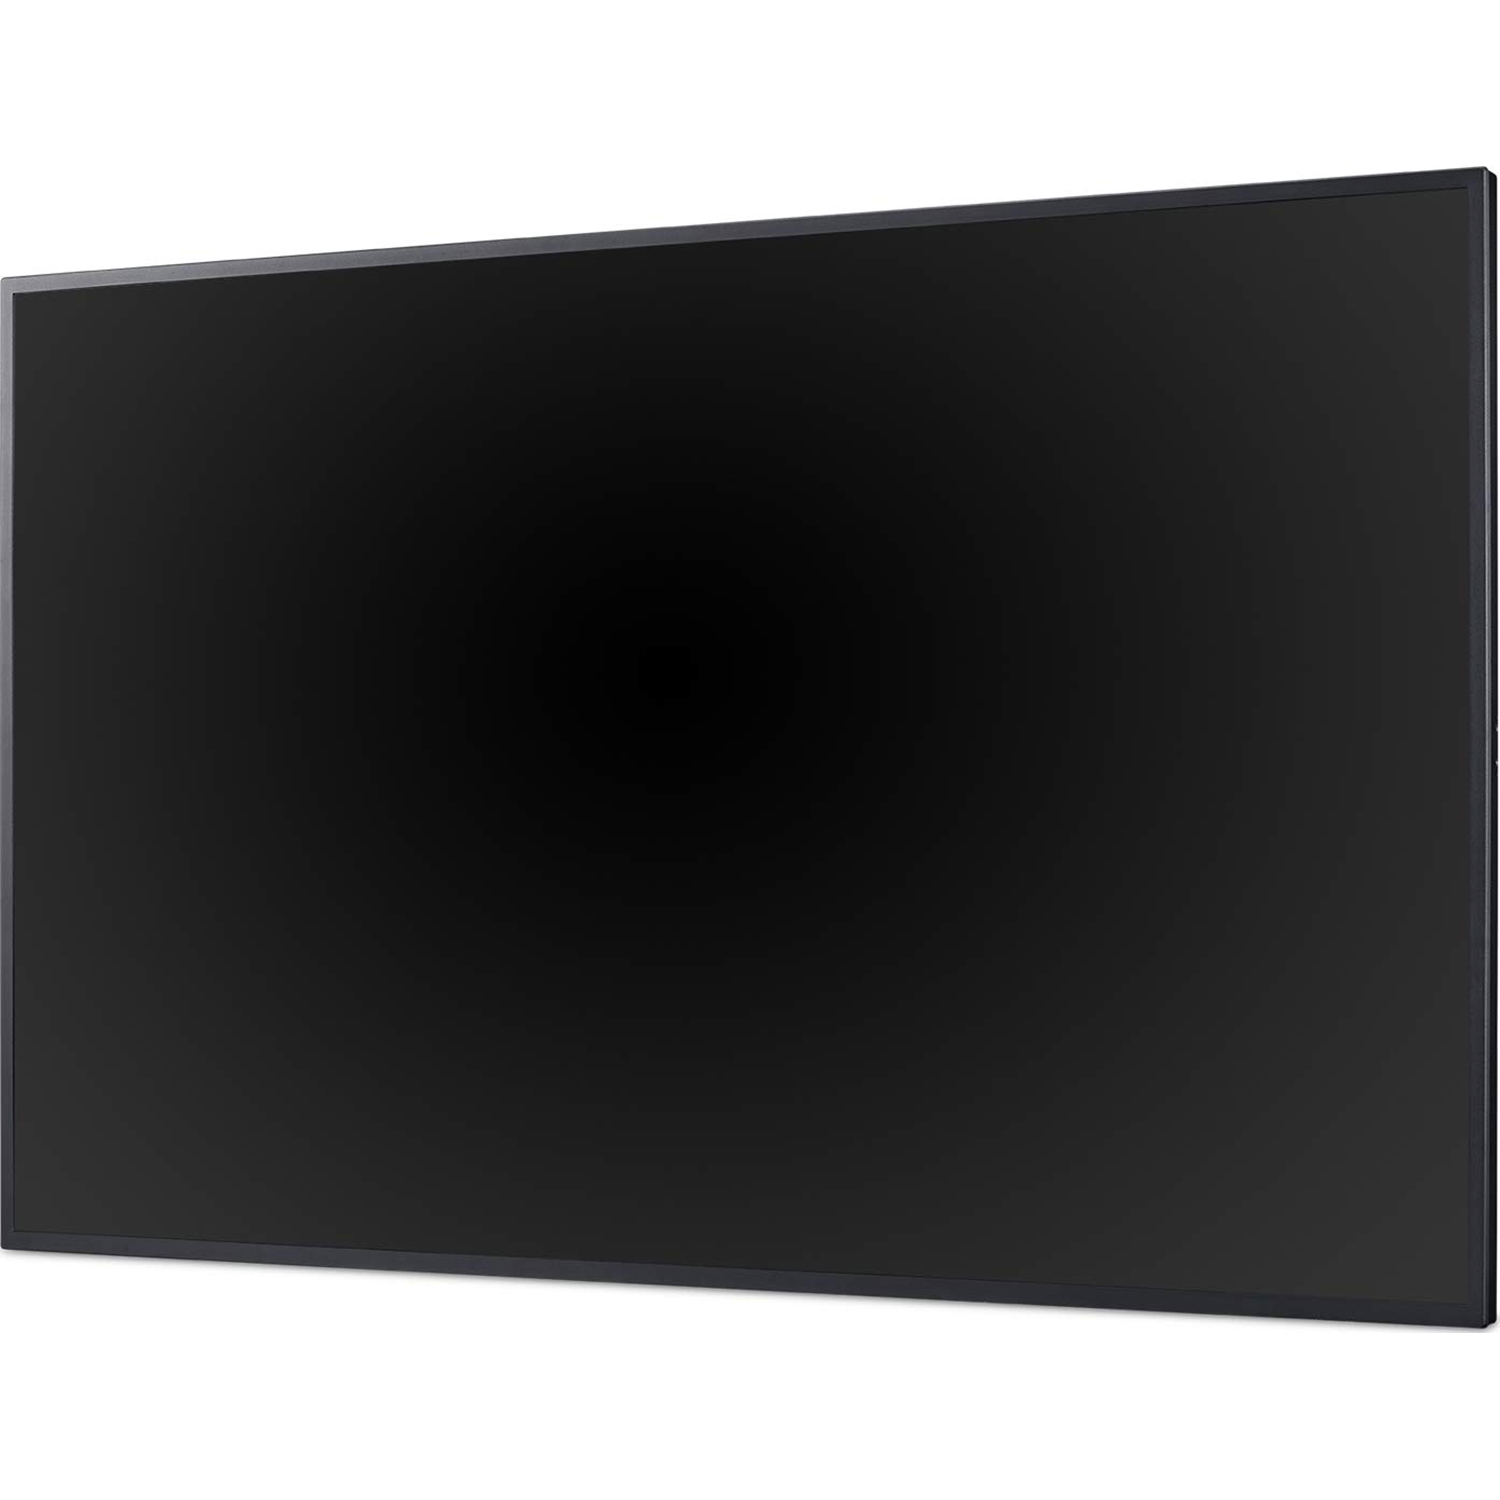 ViewSonic CDE6510 - 65" Diagonal Class (64.5" viewable) LED-backlit LCD display - digital signage - with built-in SoC media player - 4K UHD (2160p) 3840 x 2160 - direct-lit LED - image 3 of 7